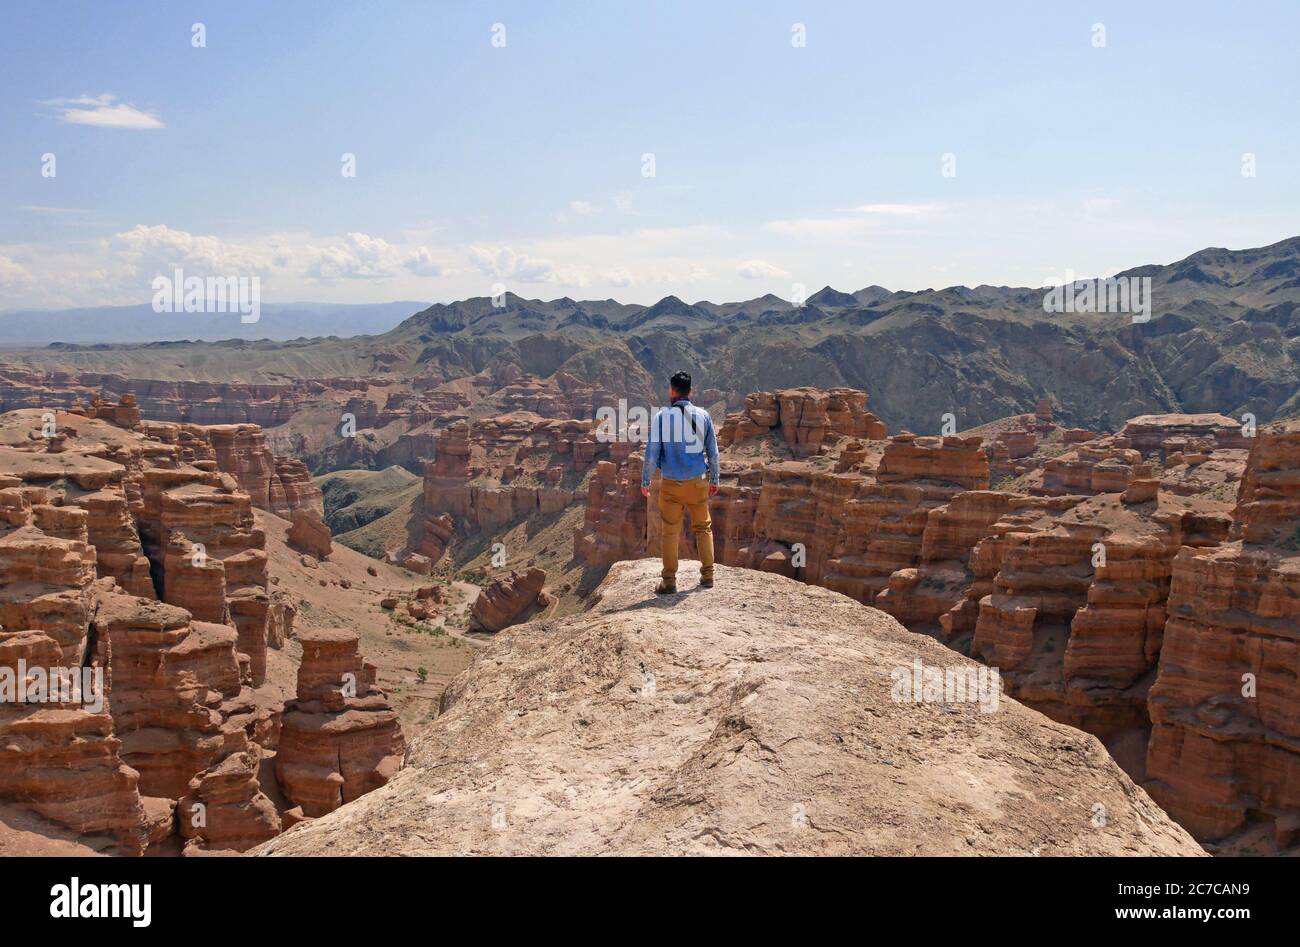 Man standing on a rock overseeing the magnificent landscape of Charyn Canyon, Kazakhstan Stock Photo